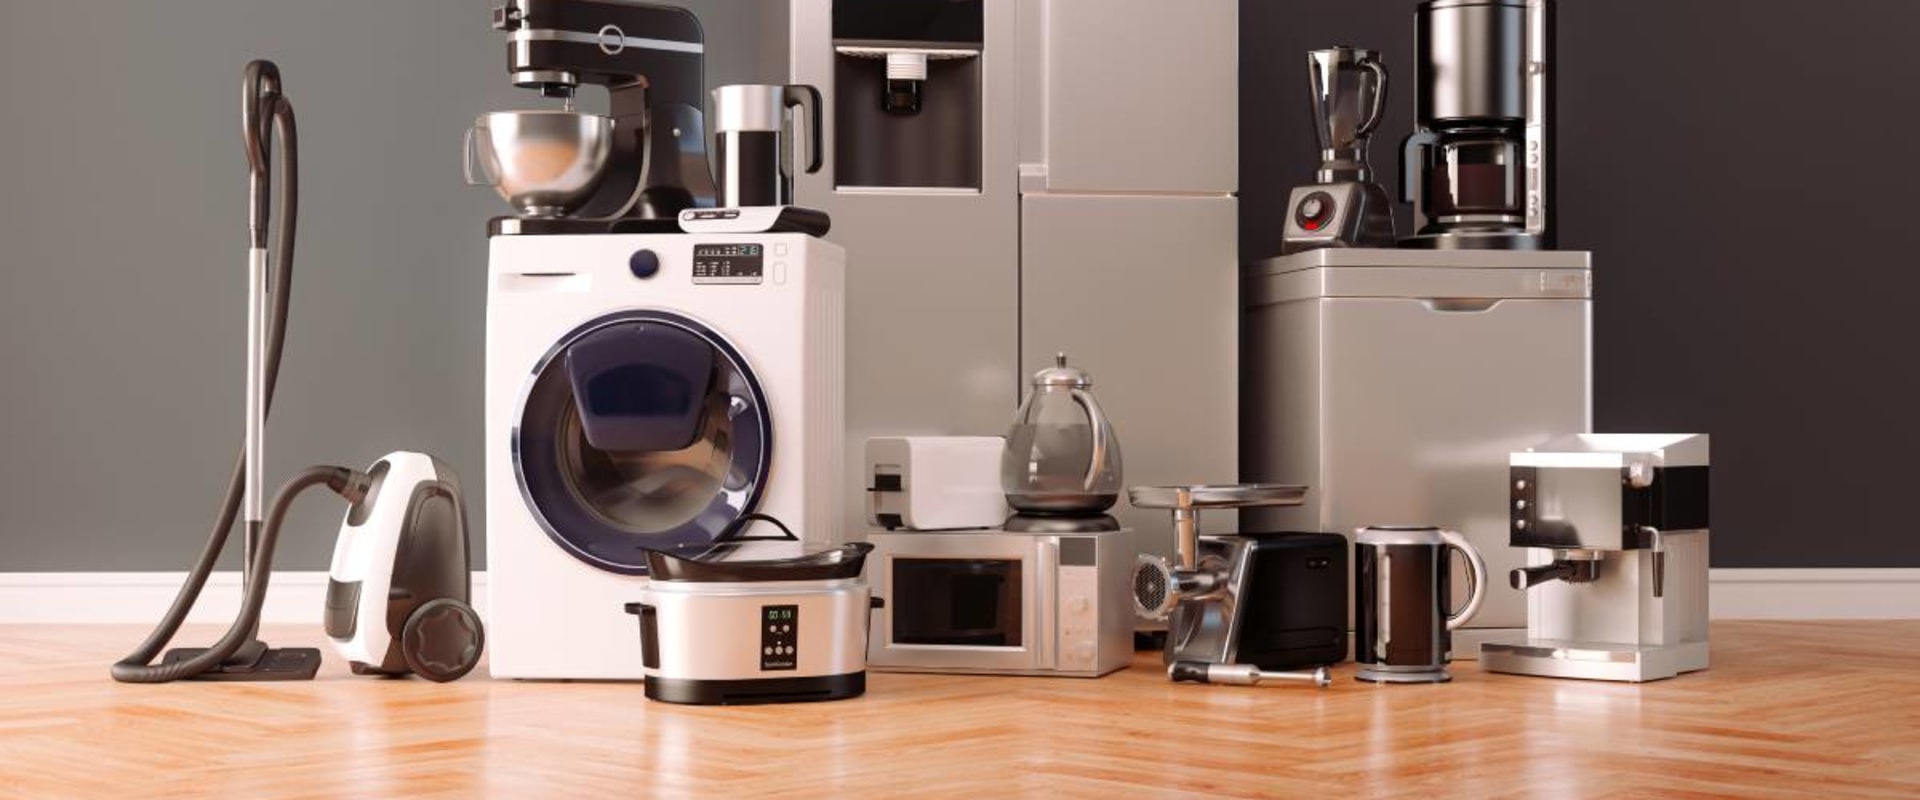 What appliances that are commonly used at home?